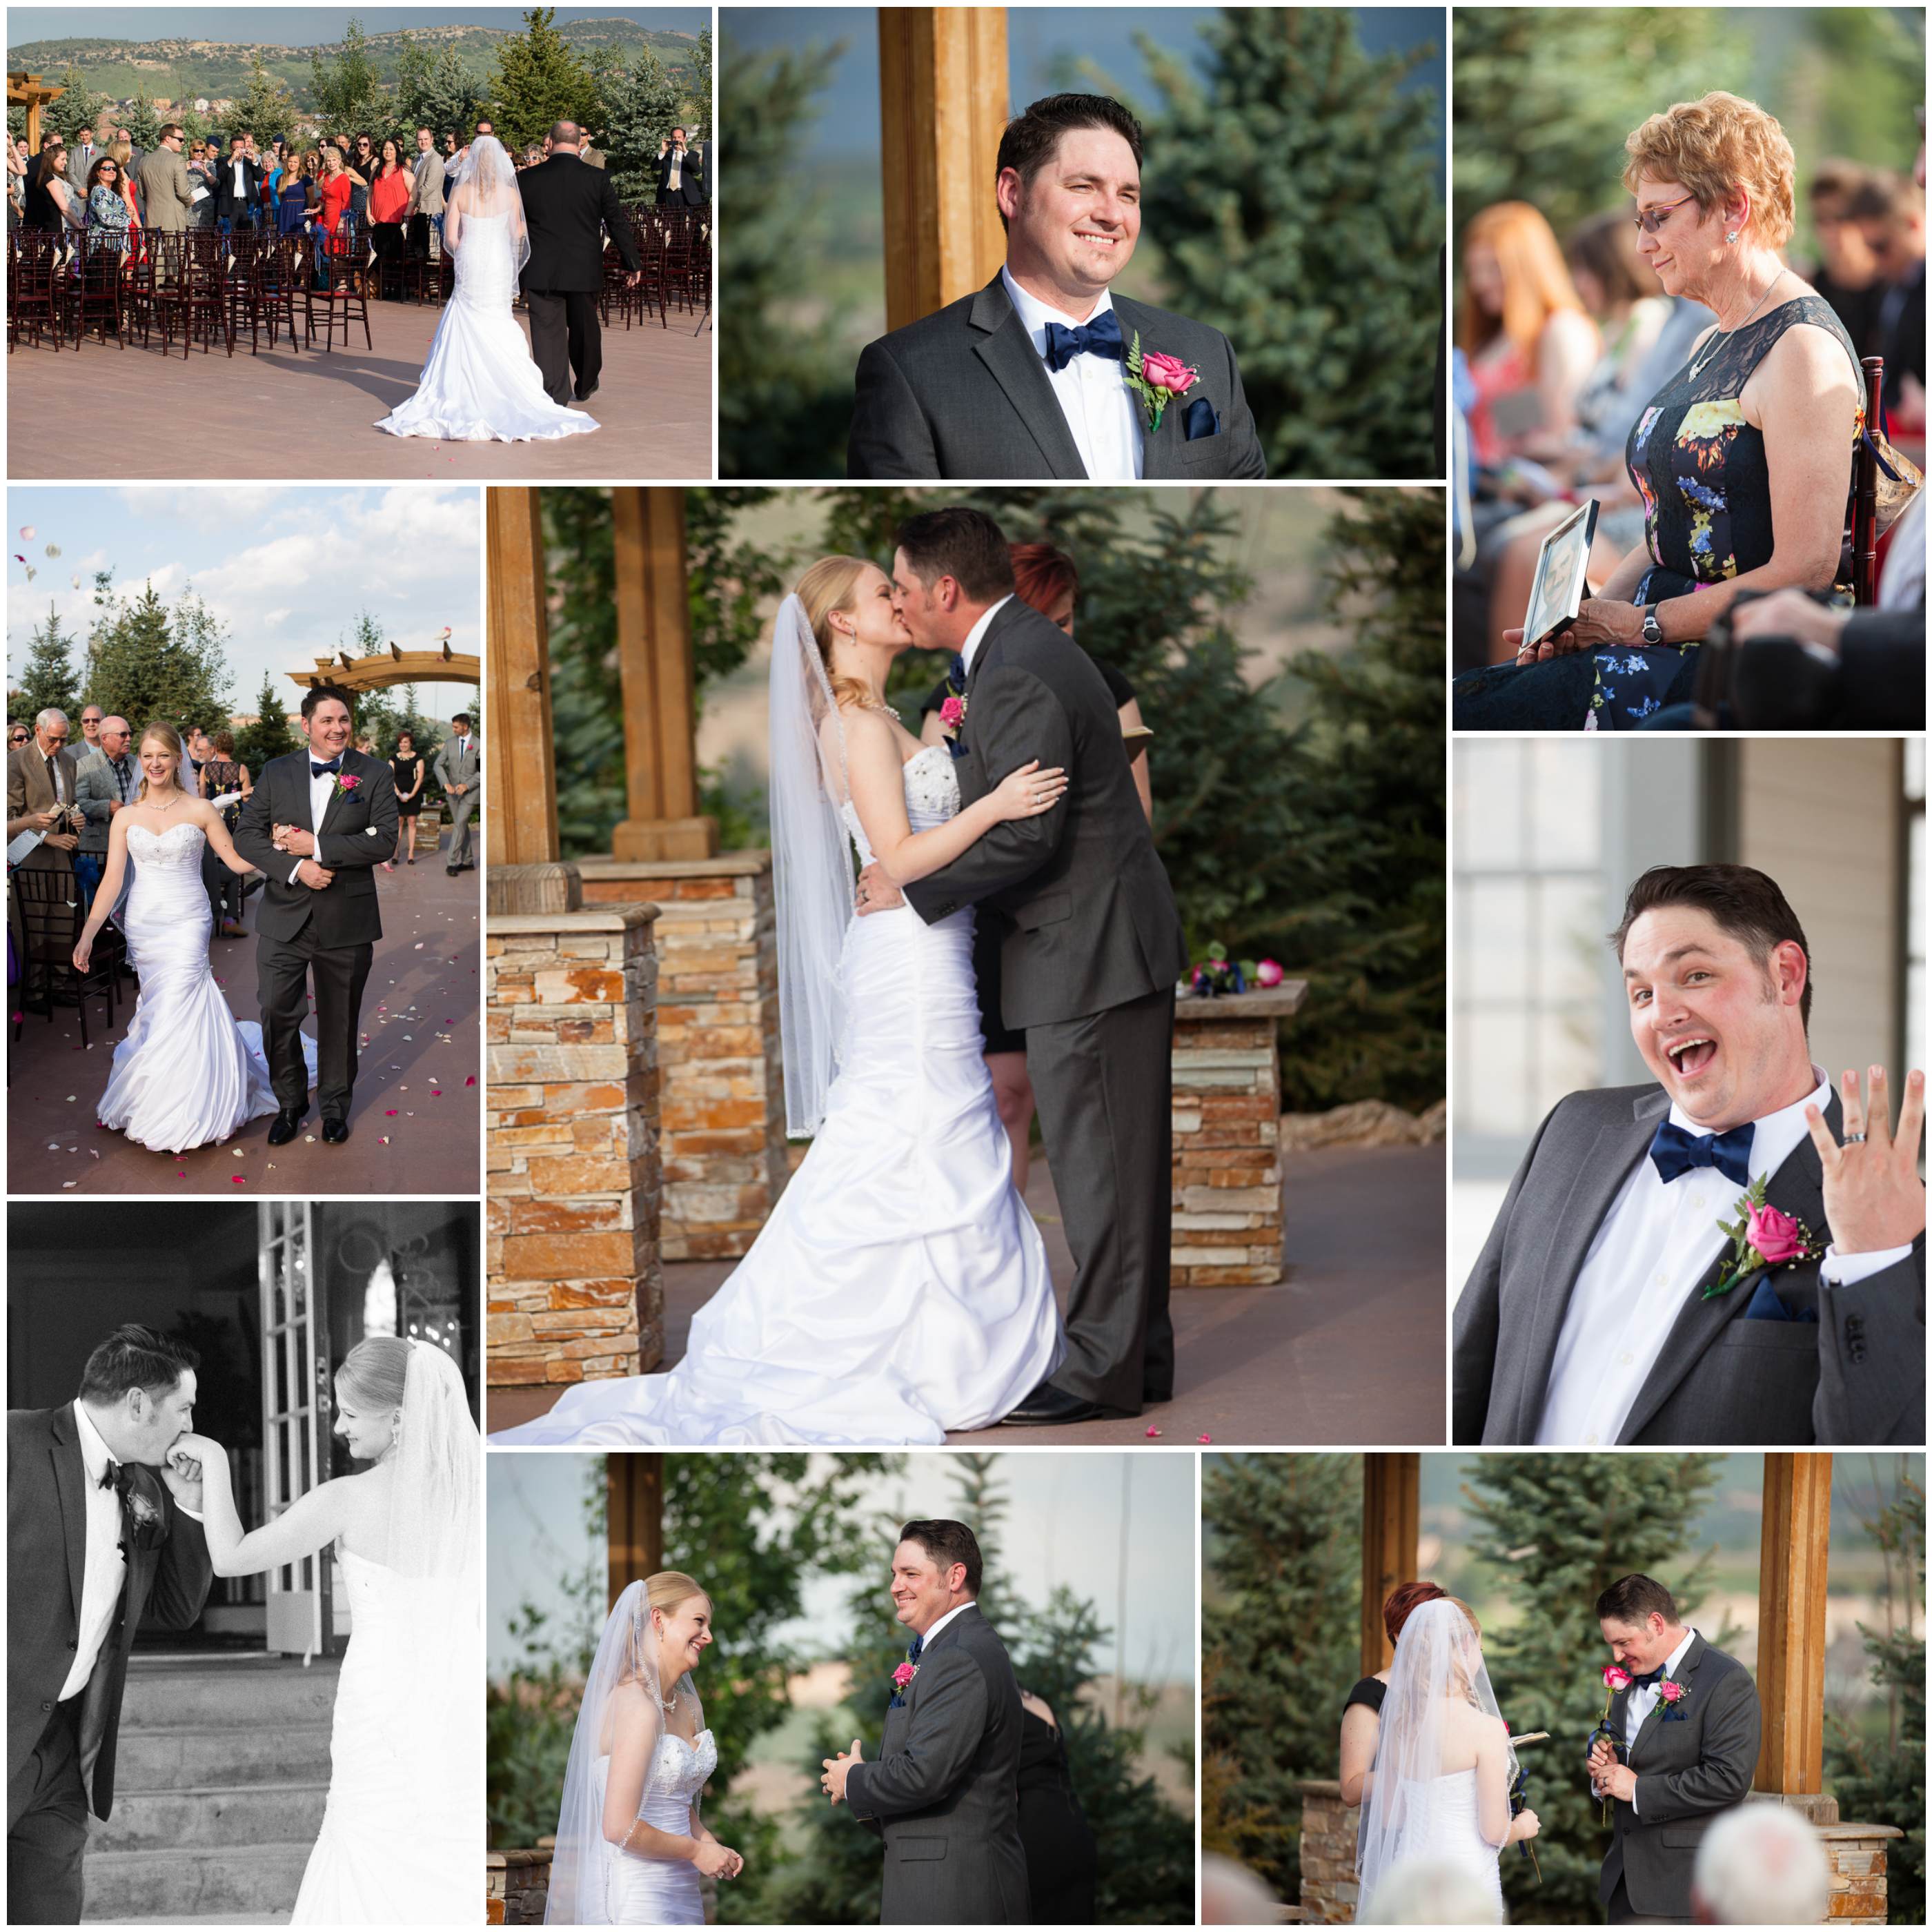 Chanel and Jason ceremony collage at willow ridge manor